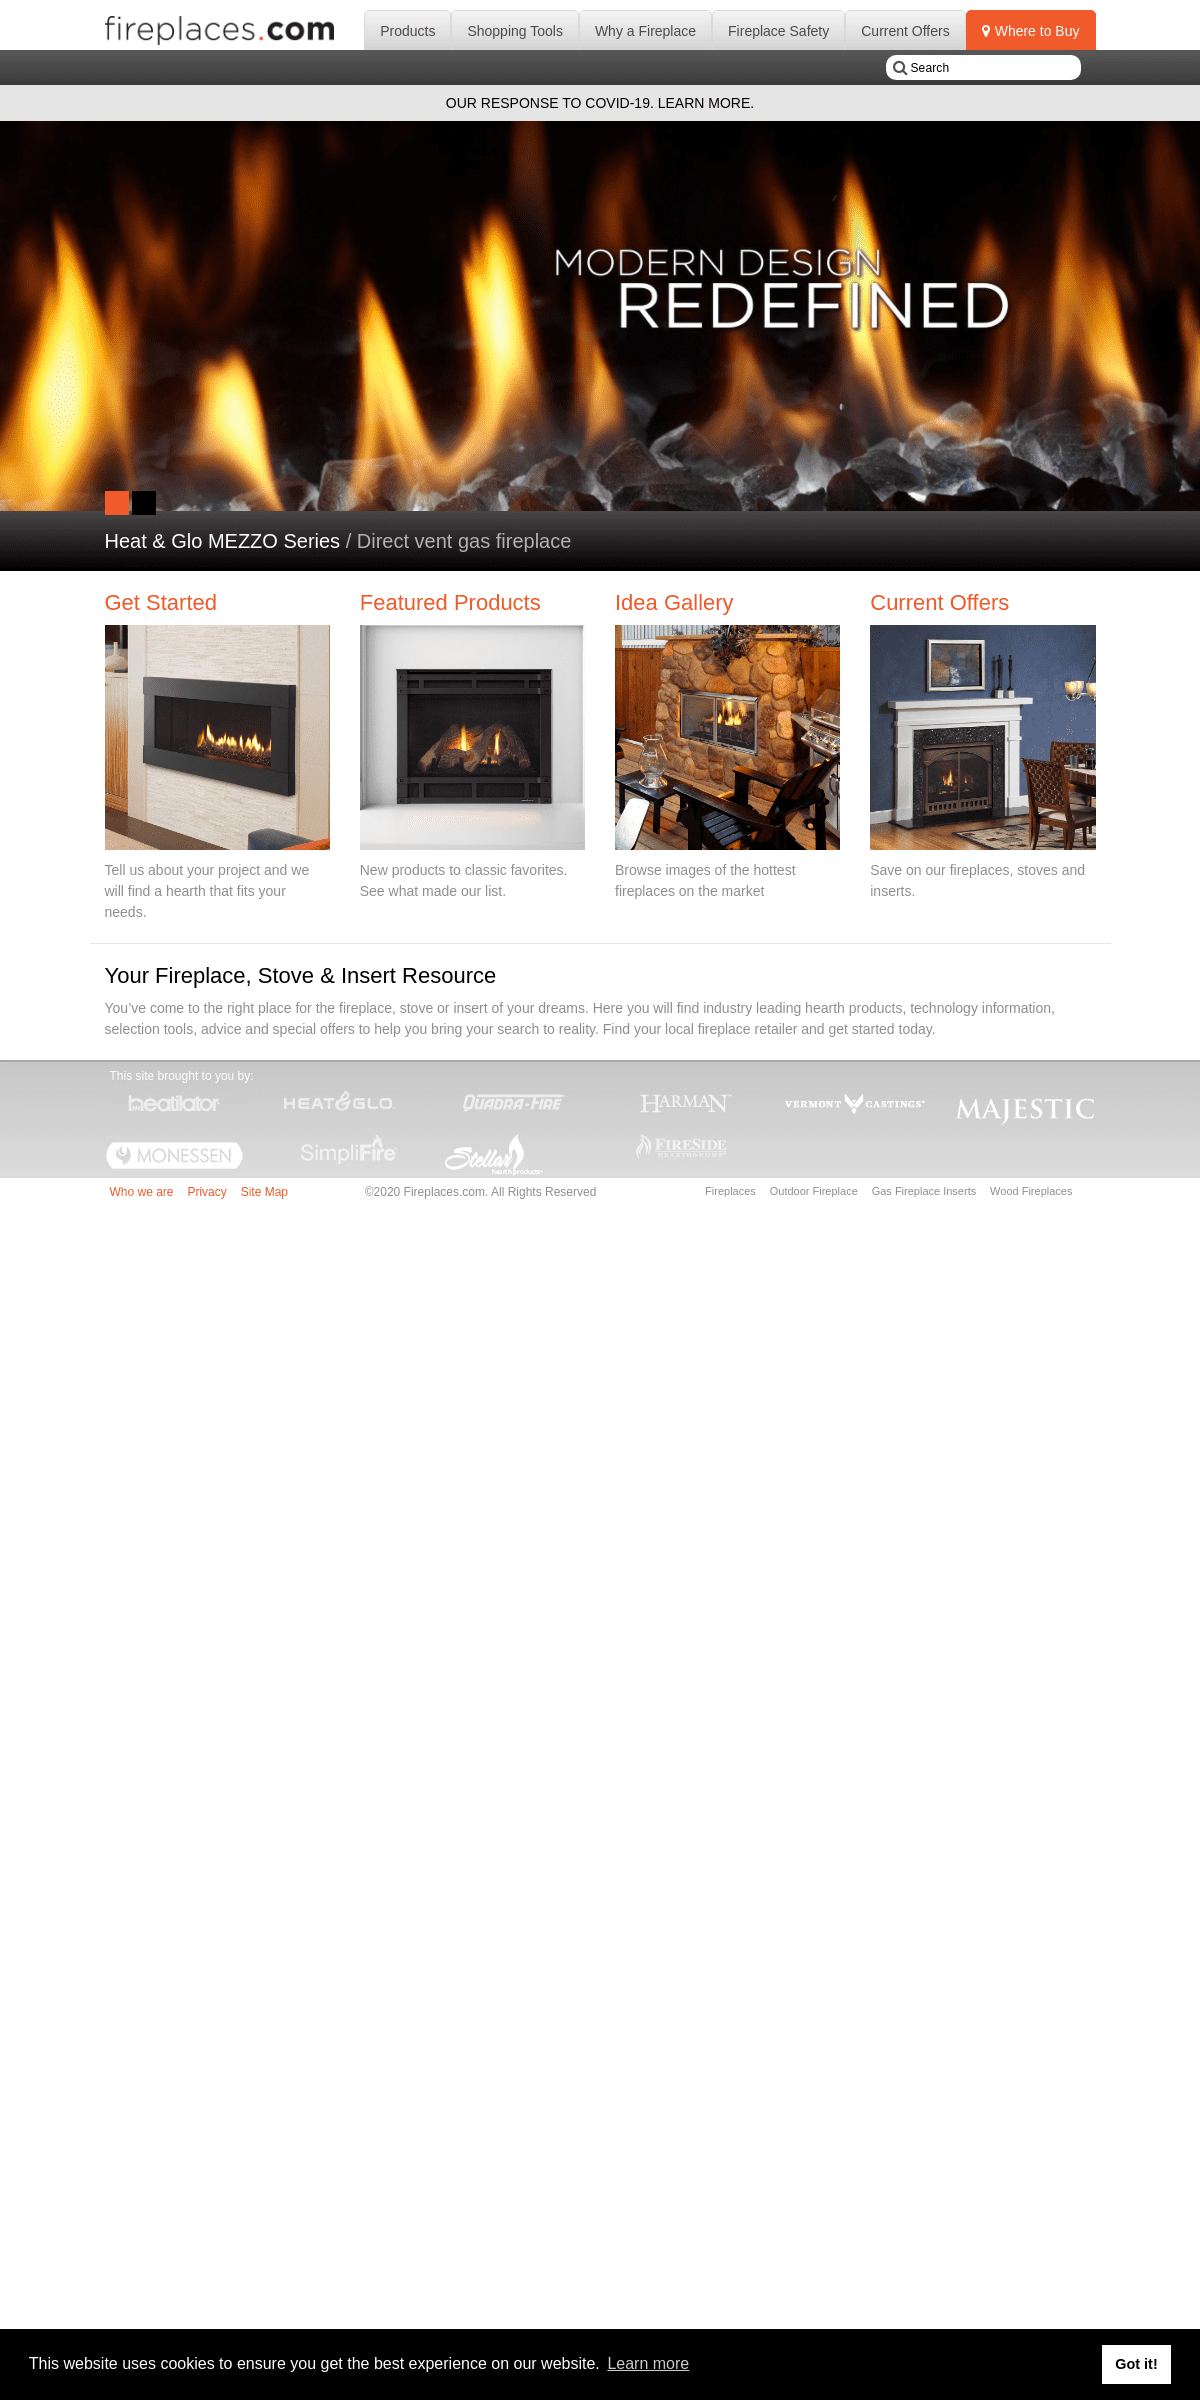 Fireplaces - Outdoor Fireplace + Gas Fireplaces - Fireplaces.com